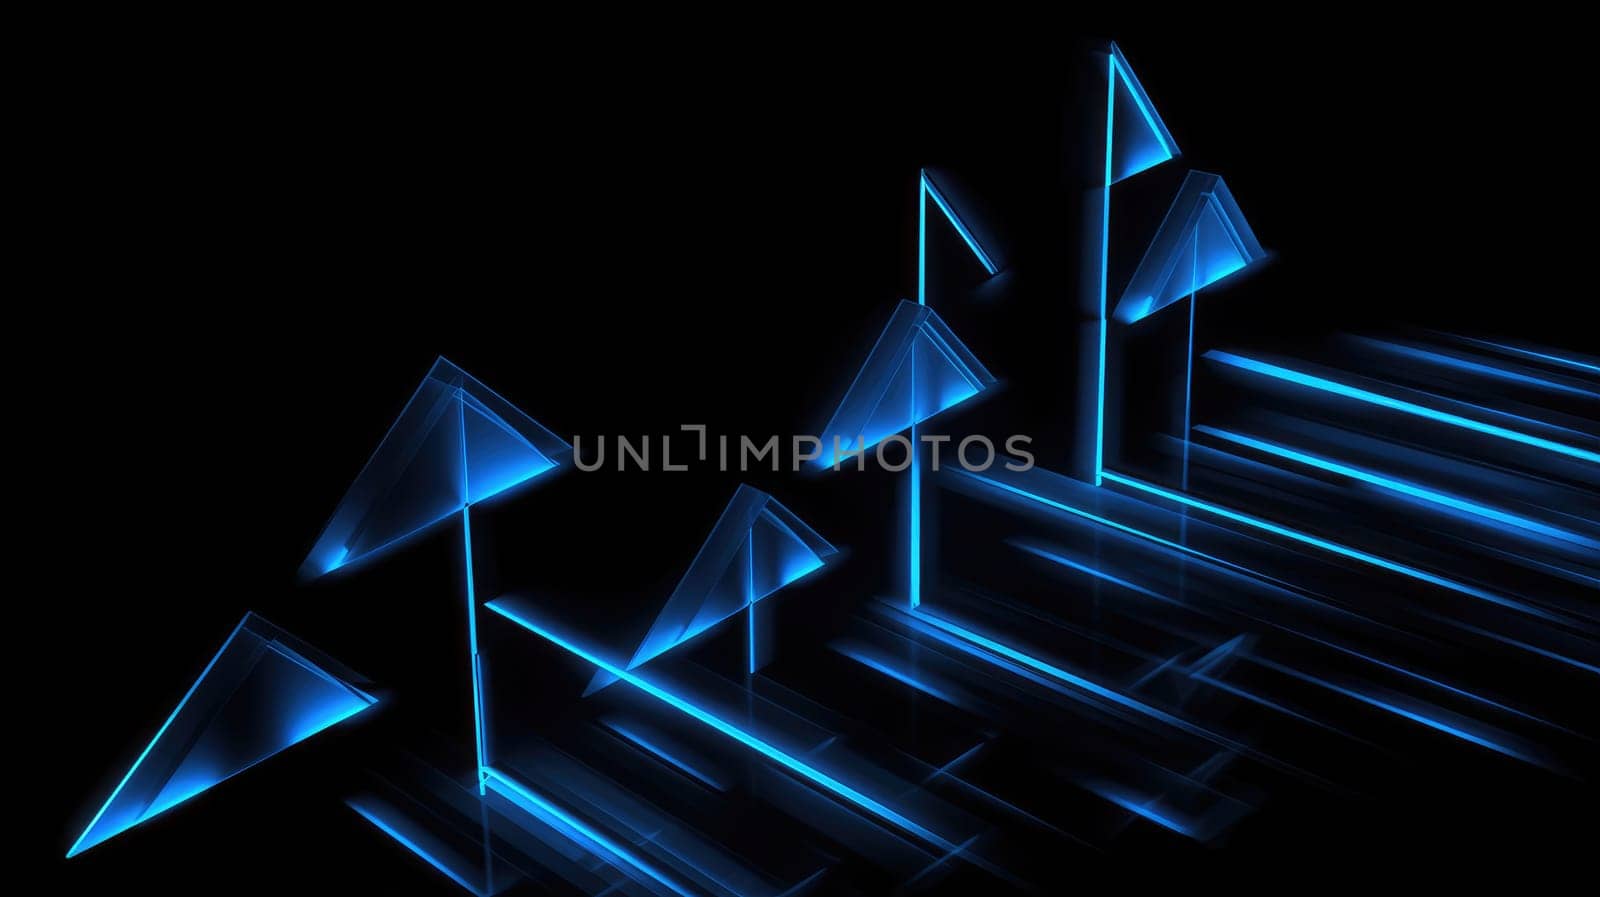 Abstract dark background with glowing blue elements